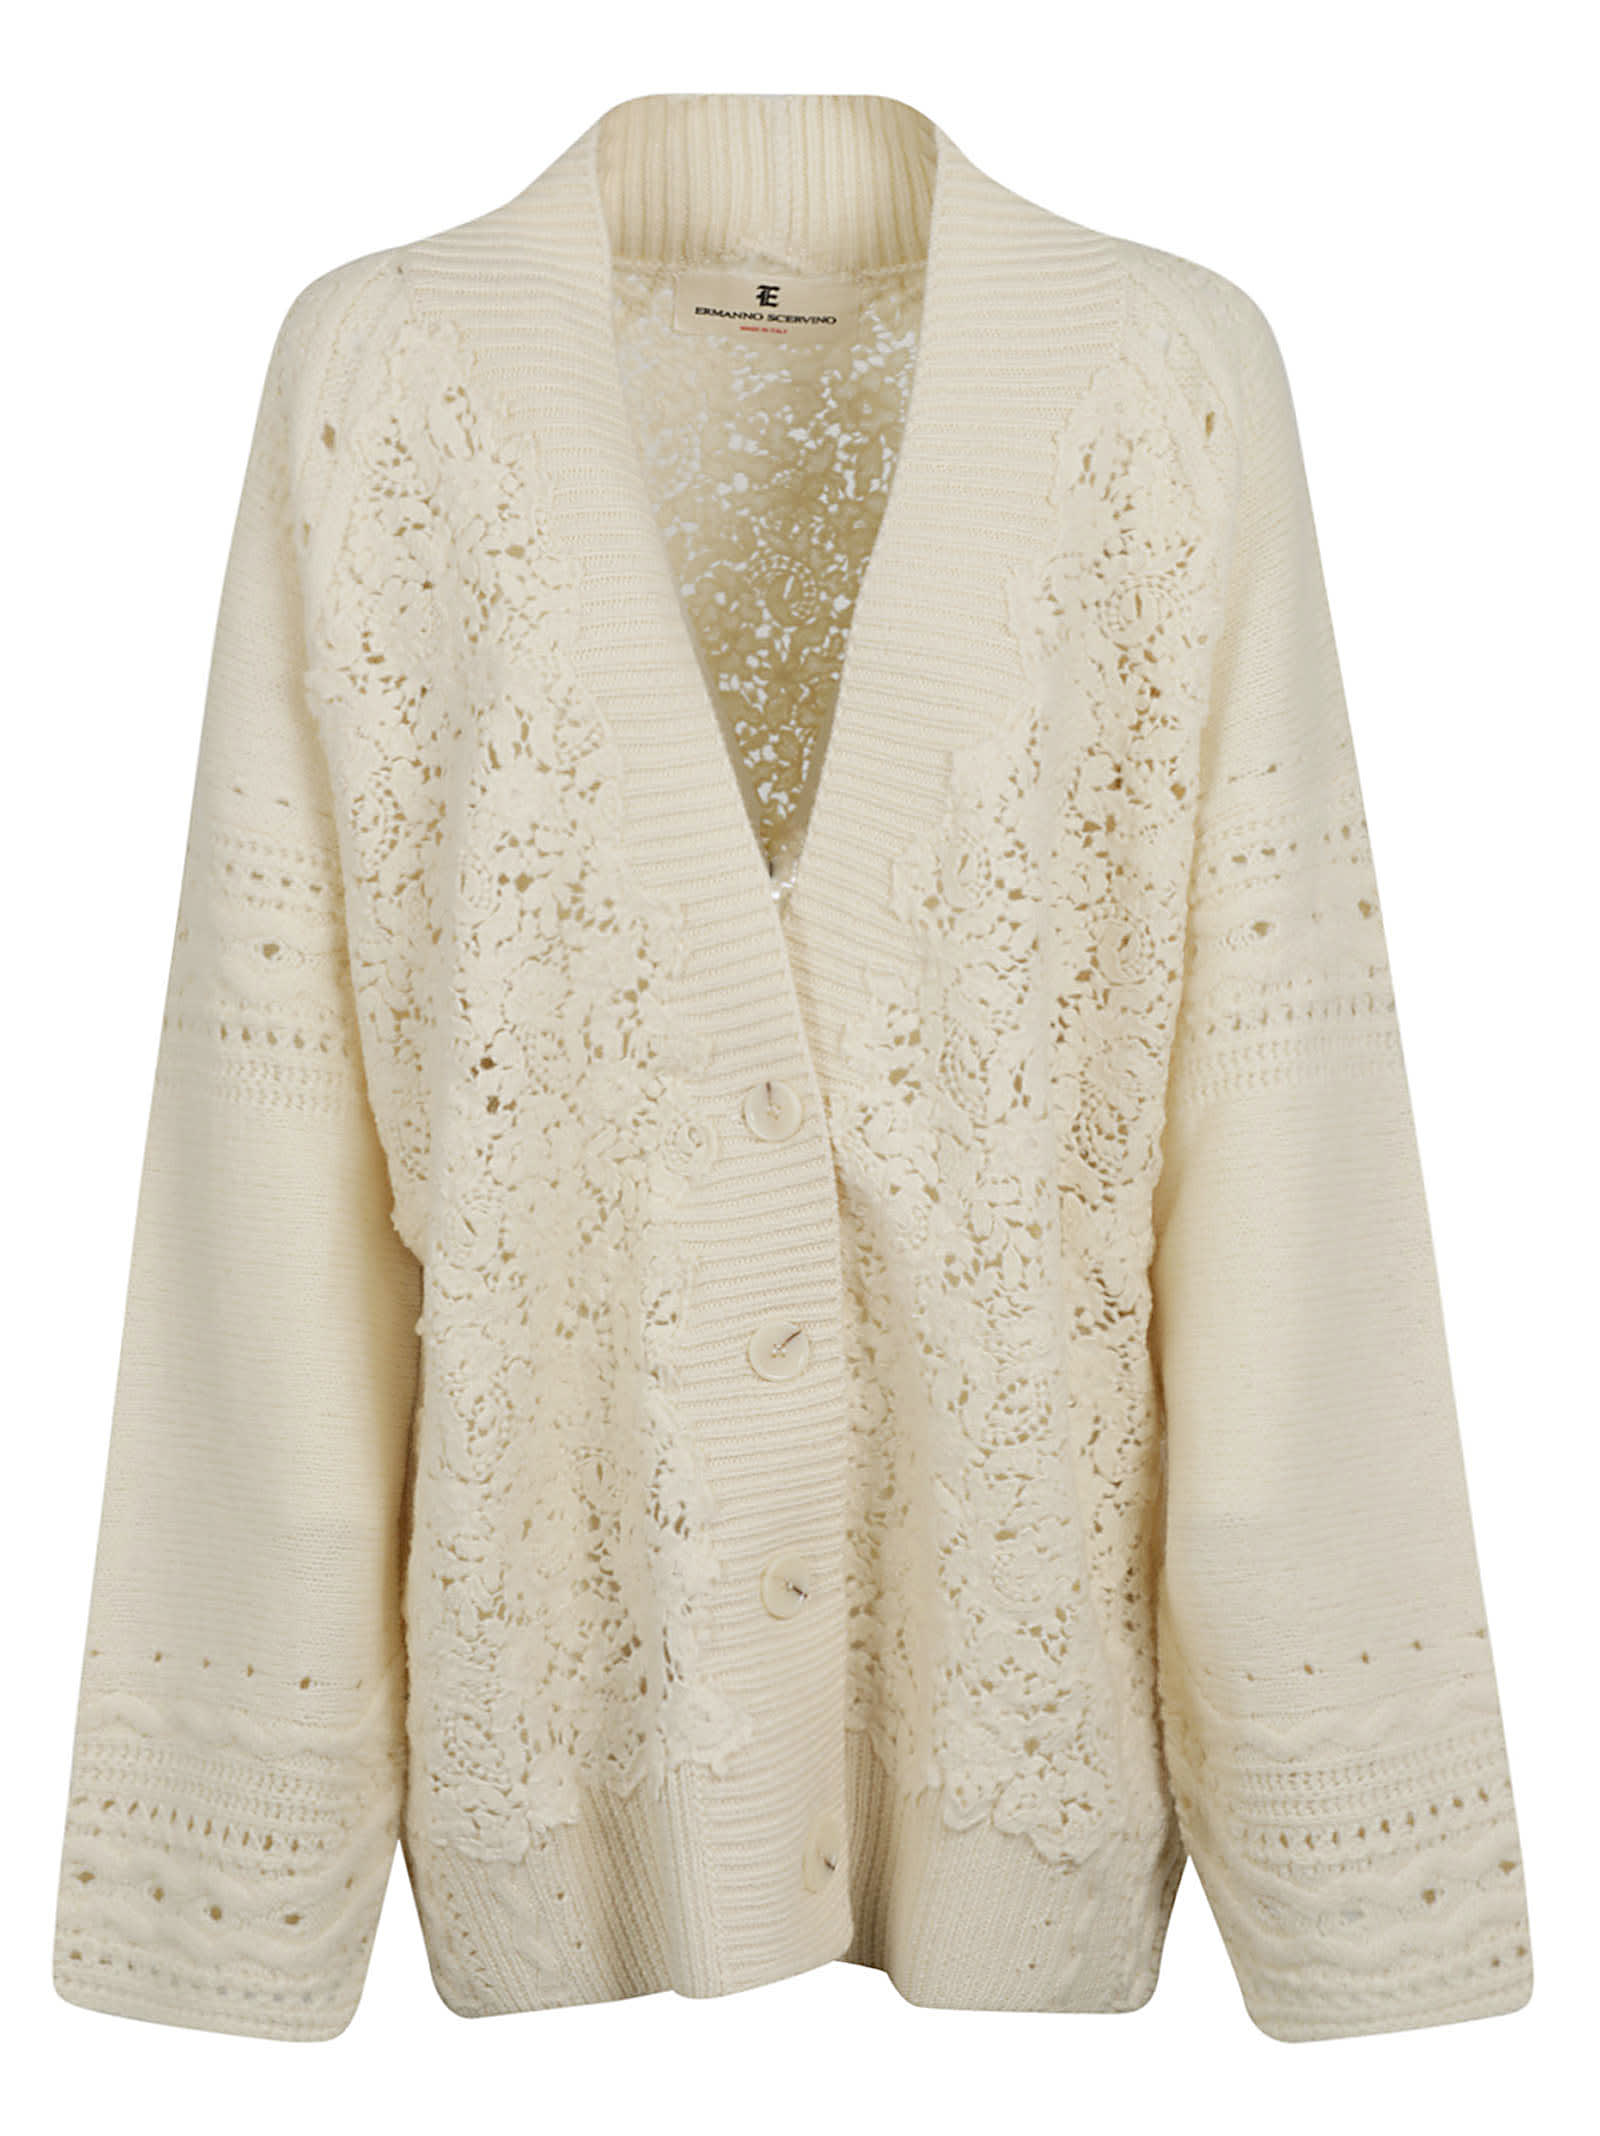 Ermanno Scervino Floral Lace Ribbed Cardigan